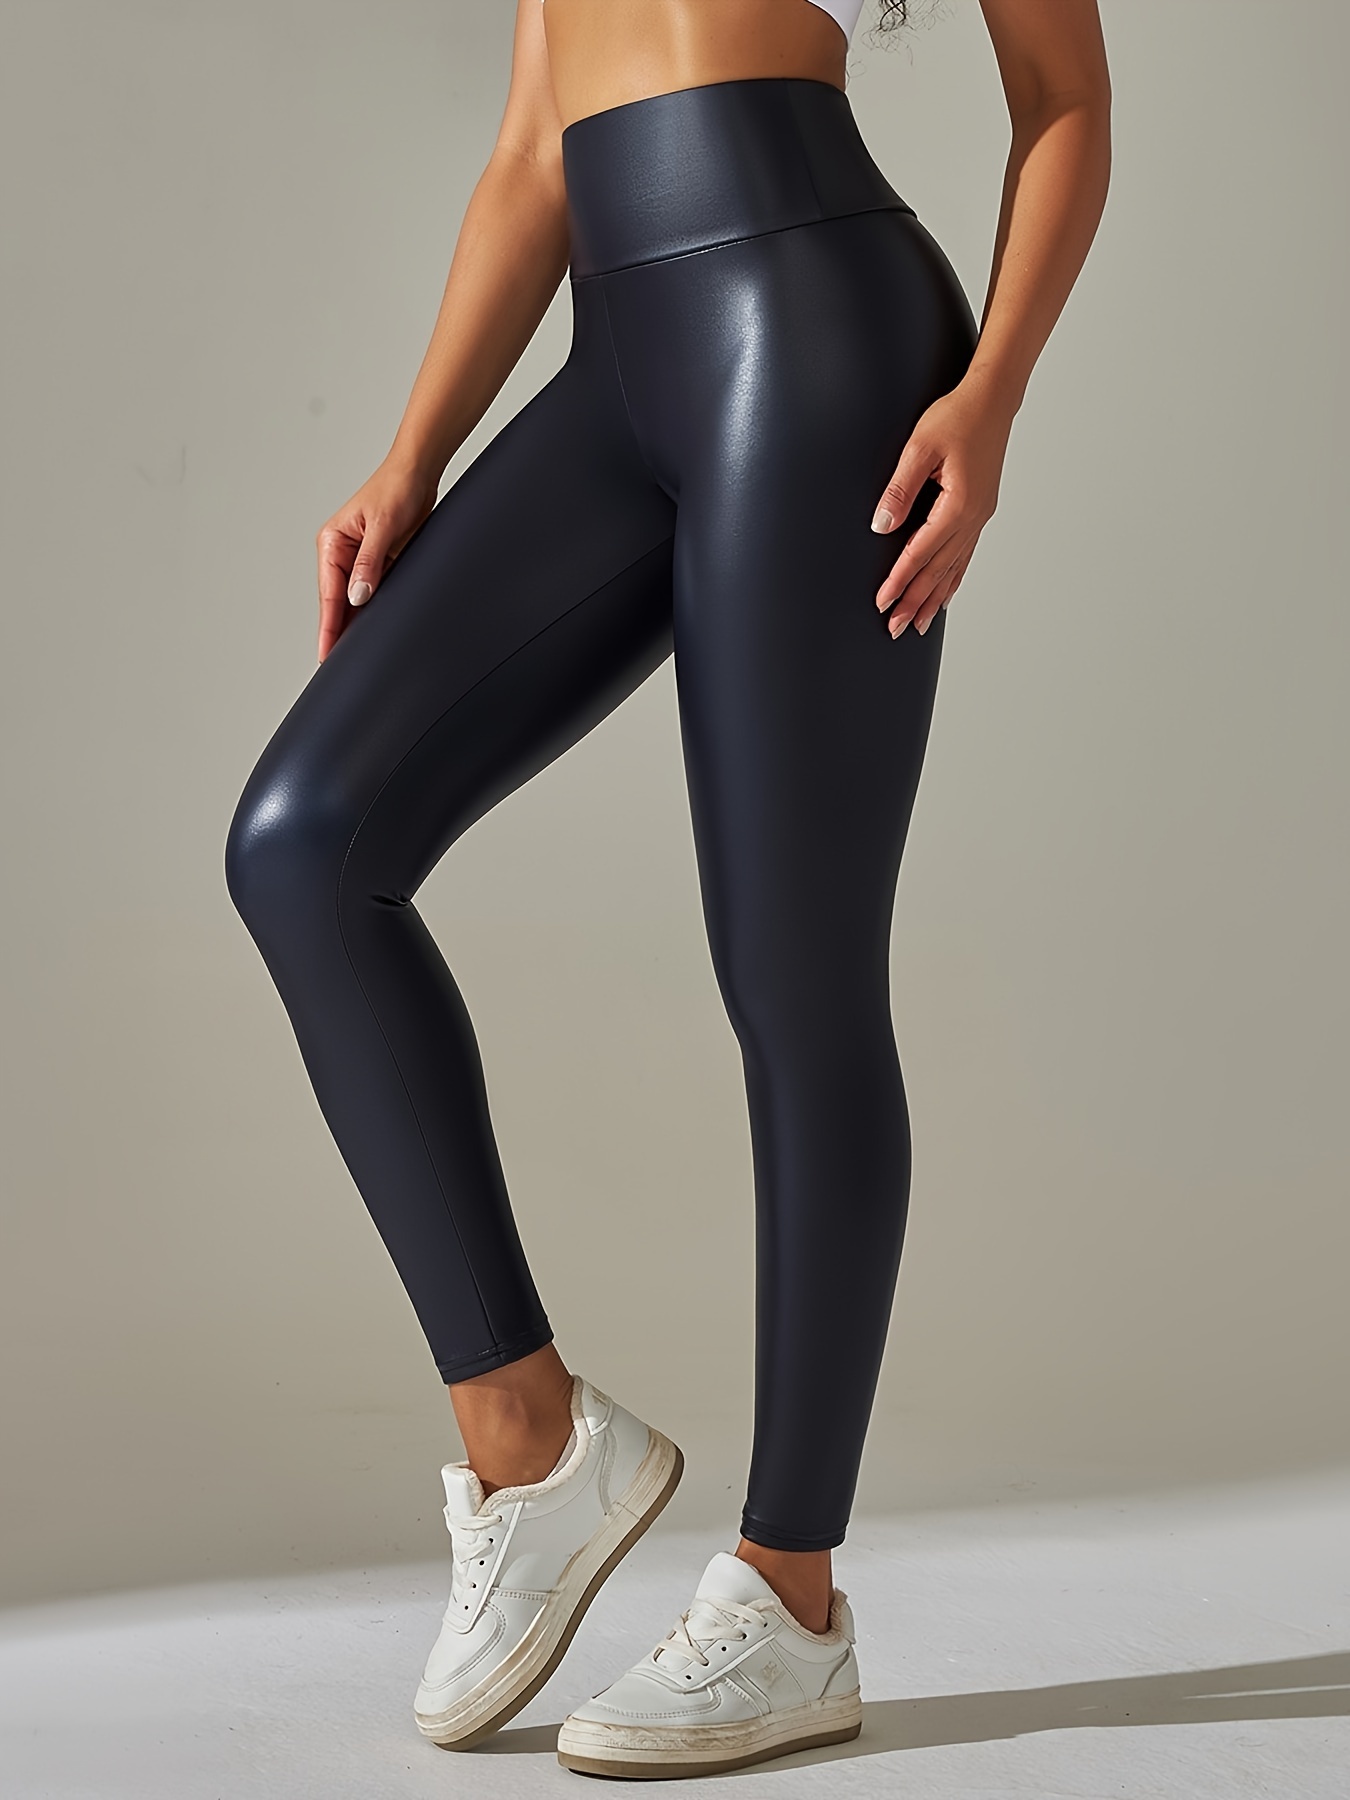 Faux PU Leather Sports Leggings, Stretchy Slim Fit Sports Yoga Pants,  Women's Activewear